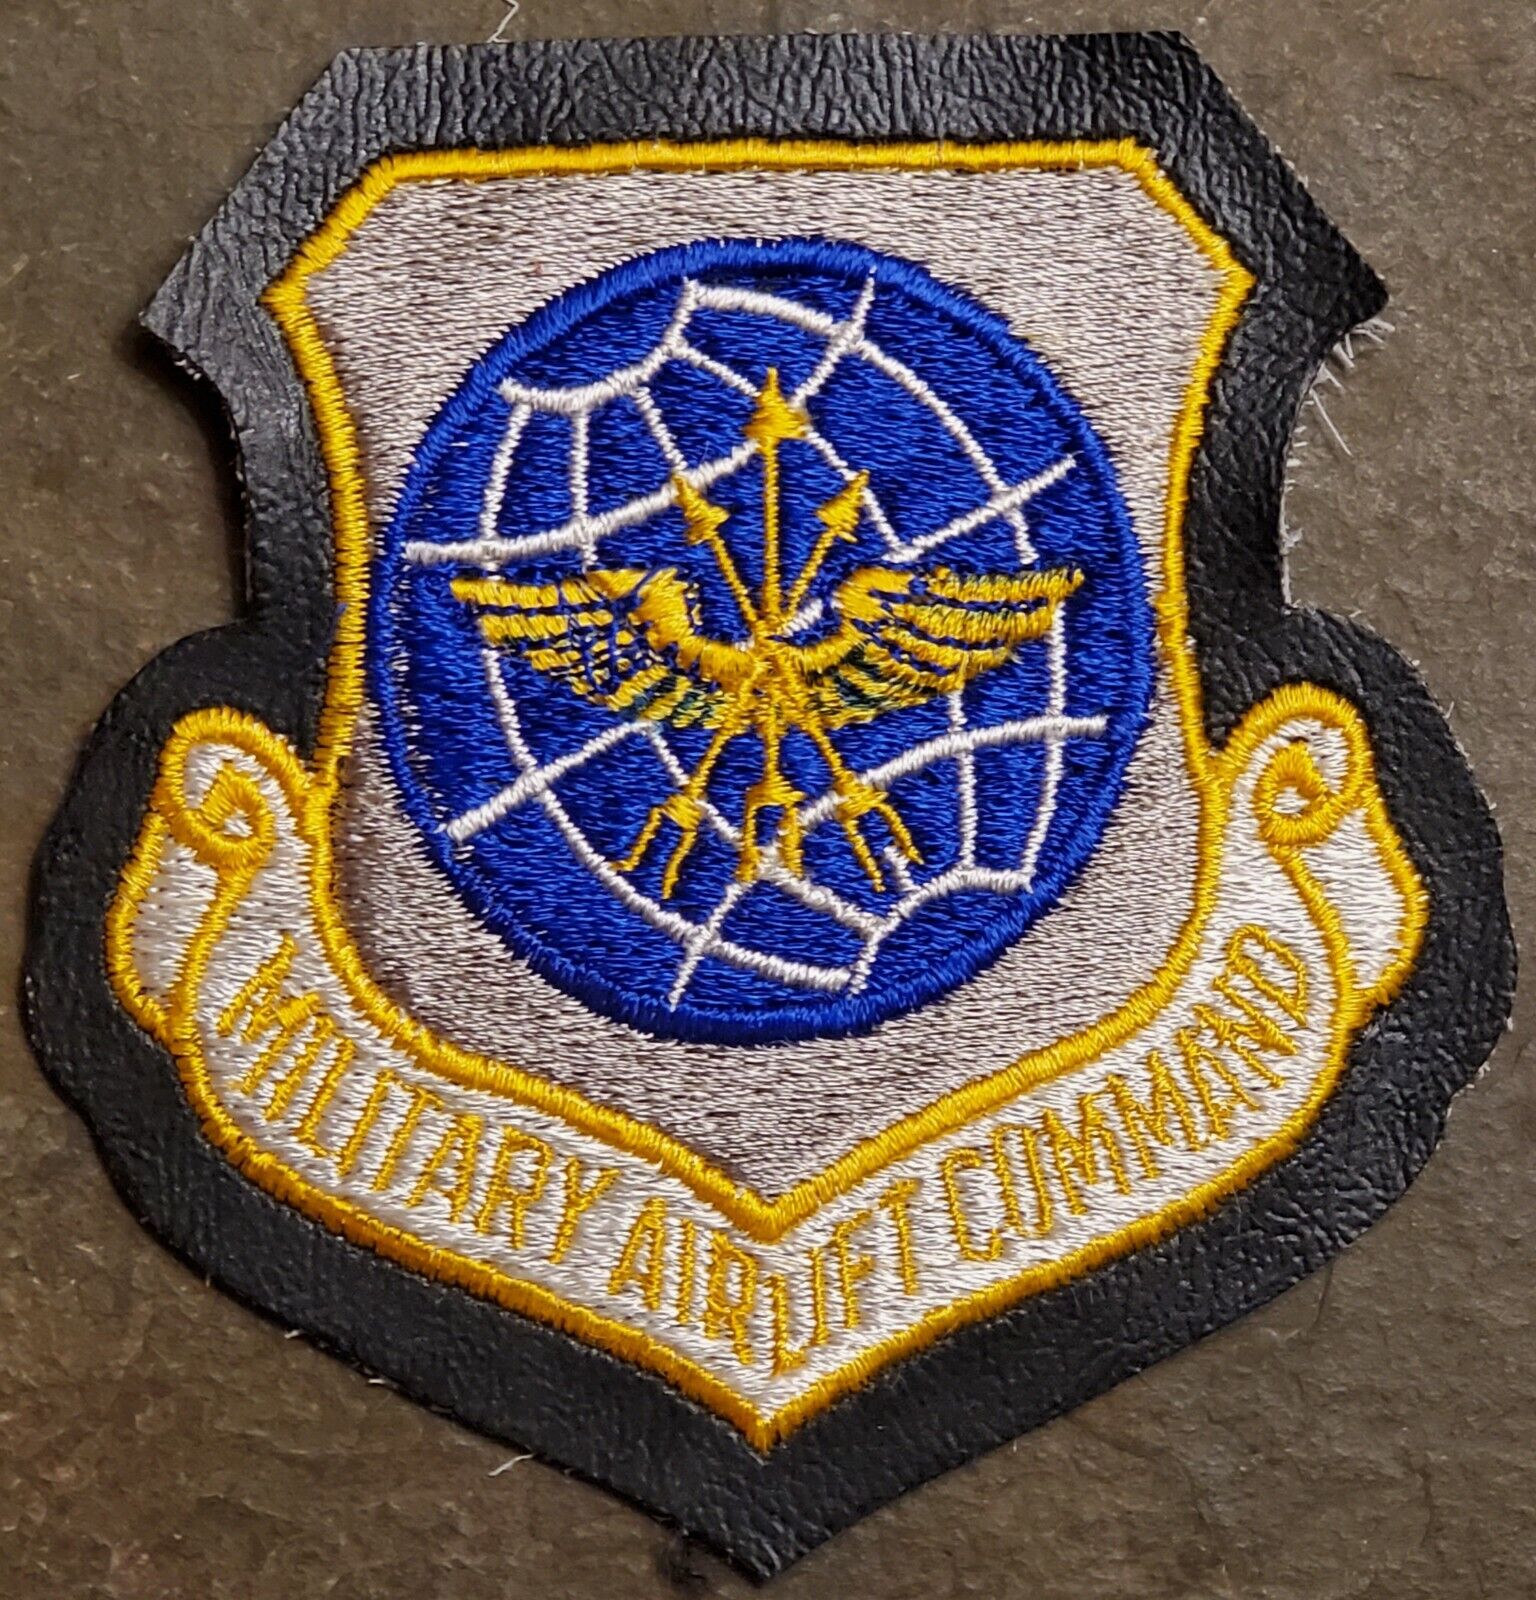 USAF AIR FORCE Military Airlift Command (MAC) Patch COLOR VTG FLIGHT LEATHER